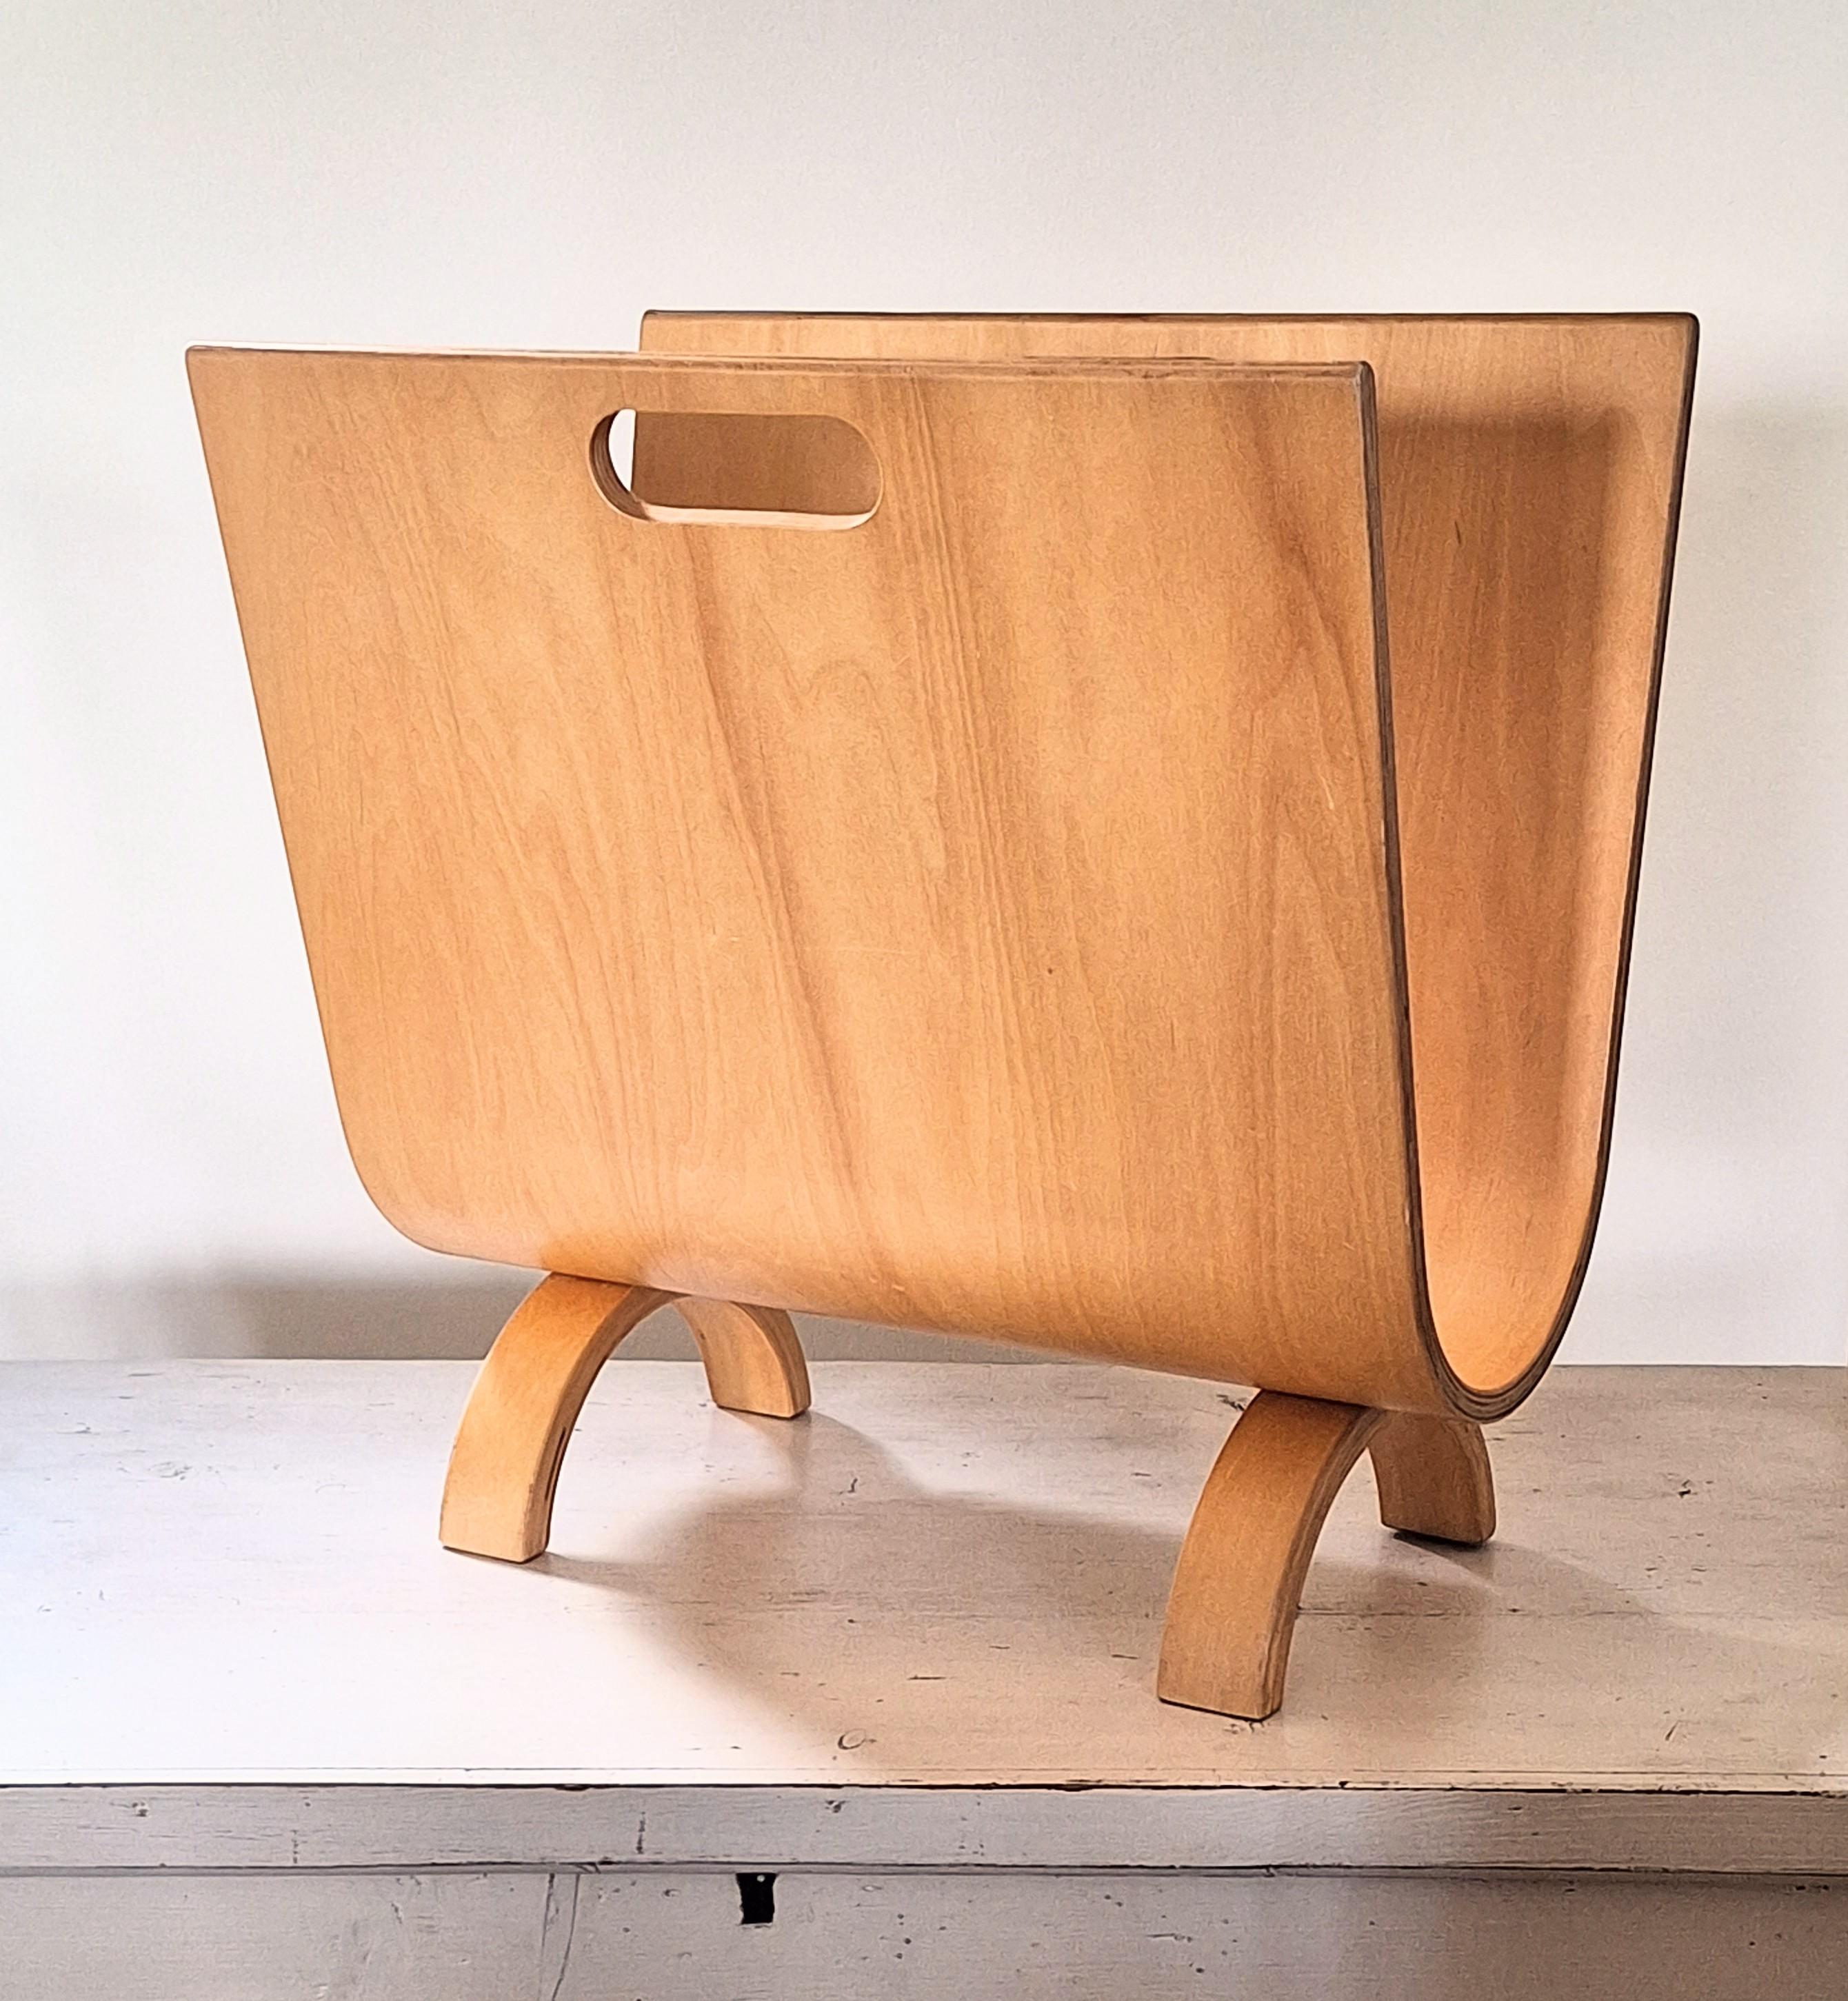 Lovely vintage birch bentwood magazine rack in the style of Alvar Aalto and Marcel Breuer's bentwood furniture.
Featuring clean modernist U-shaped design and constructed from a single bent piece of birch plywood, with cut out handles and standing on